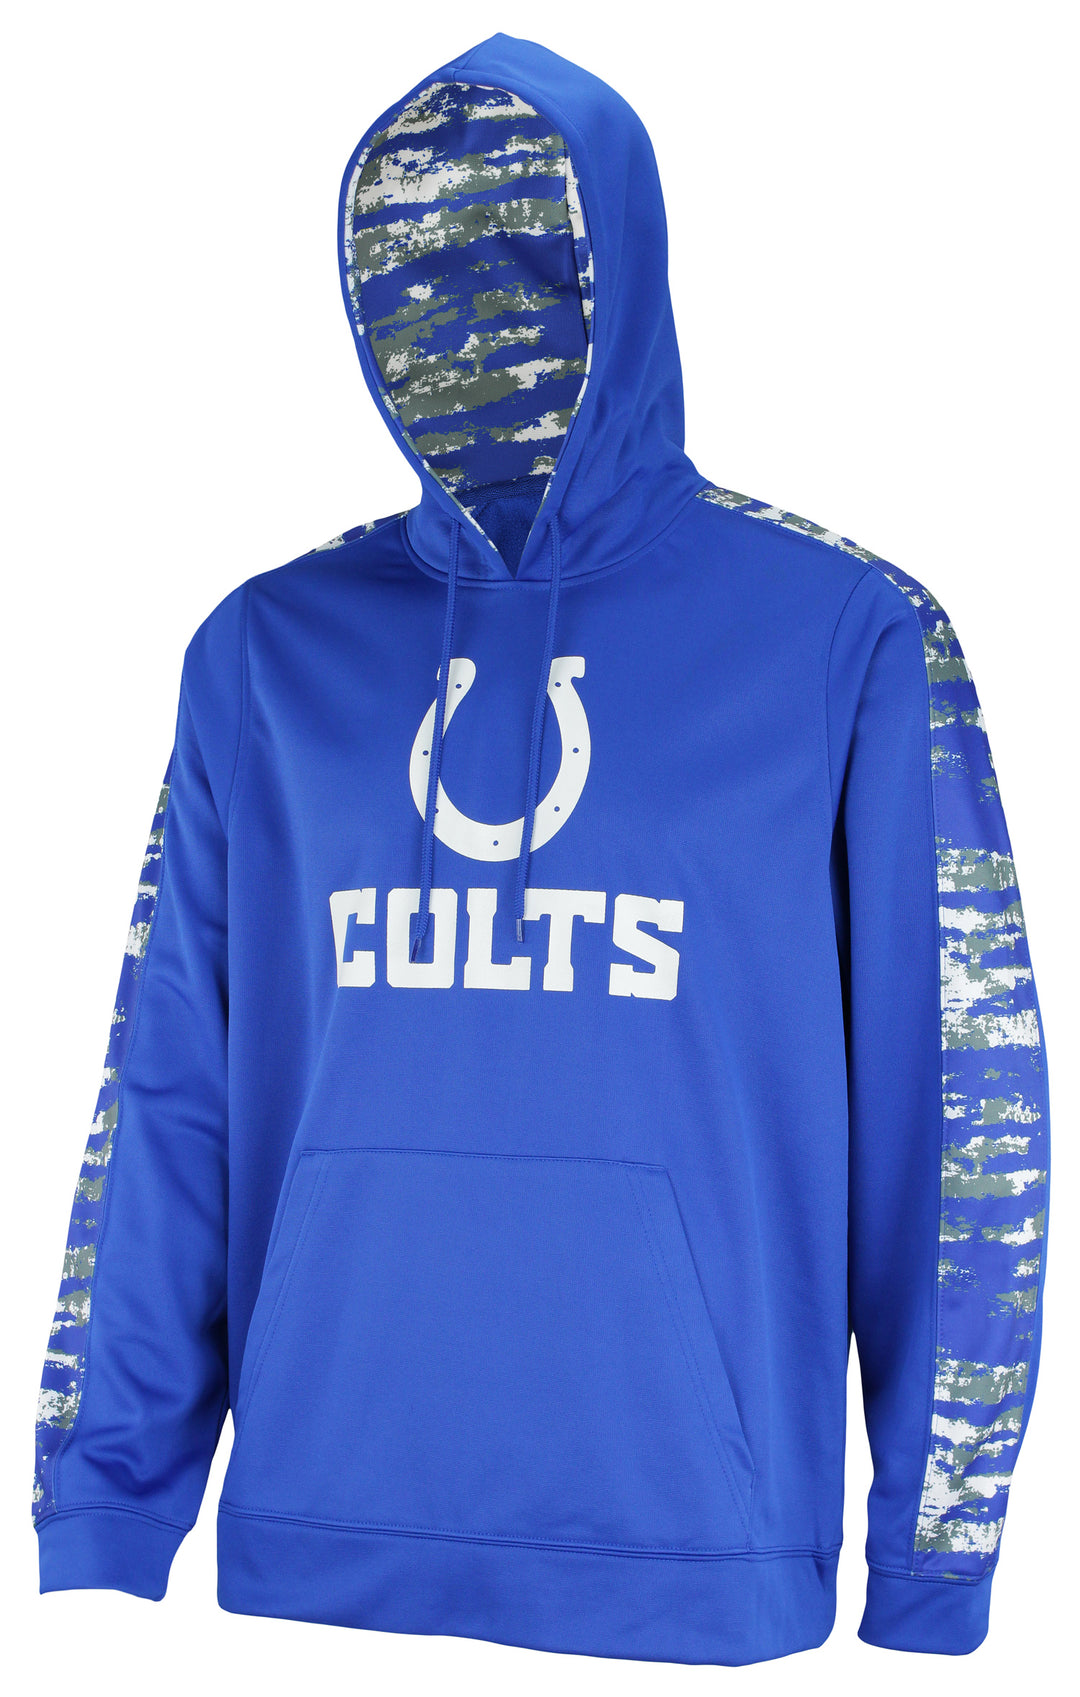 Zubaz NFL Men's Indianapolis Colts Performance Hoodie w/ Oxide Sleeves